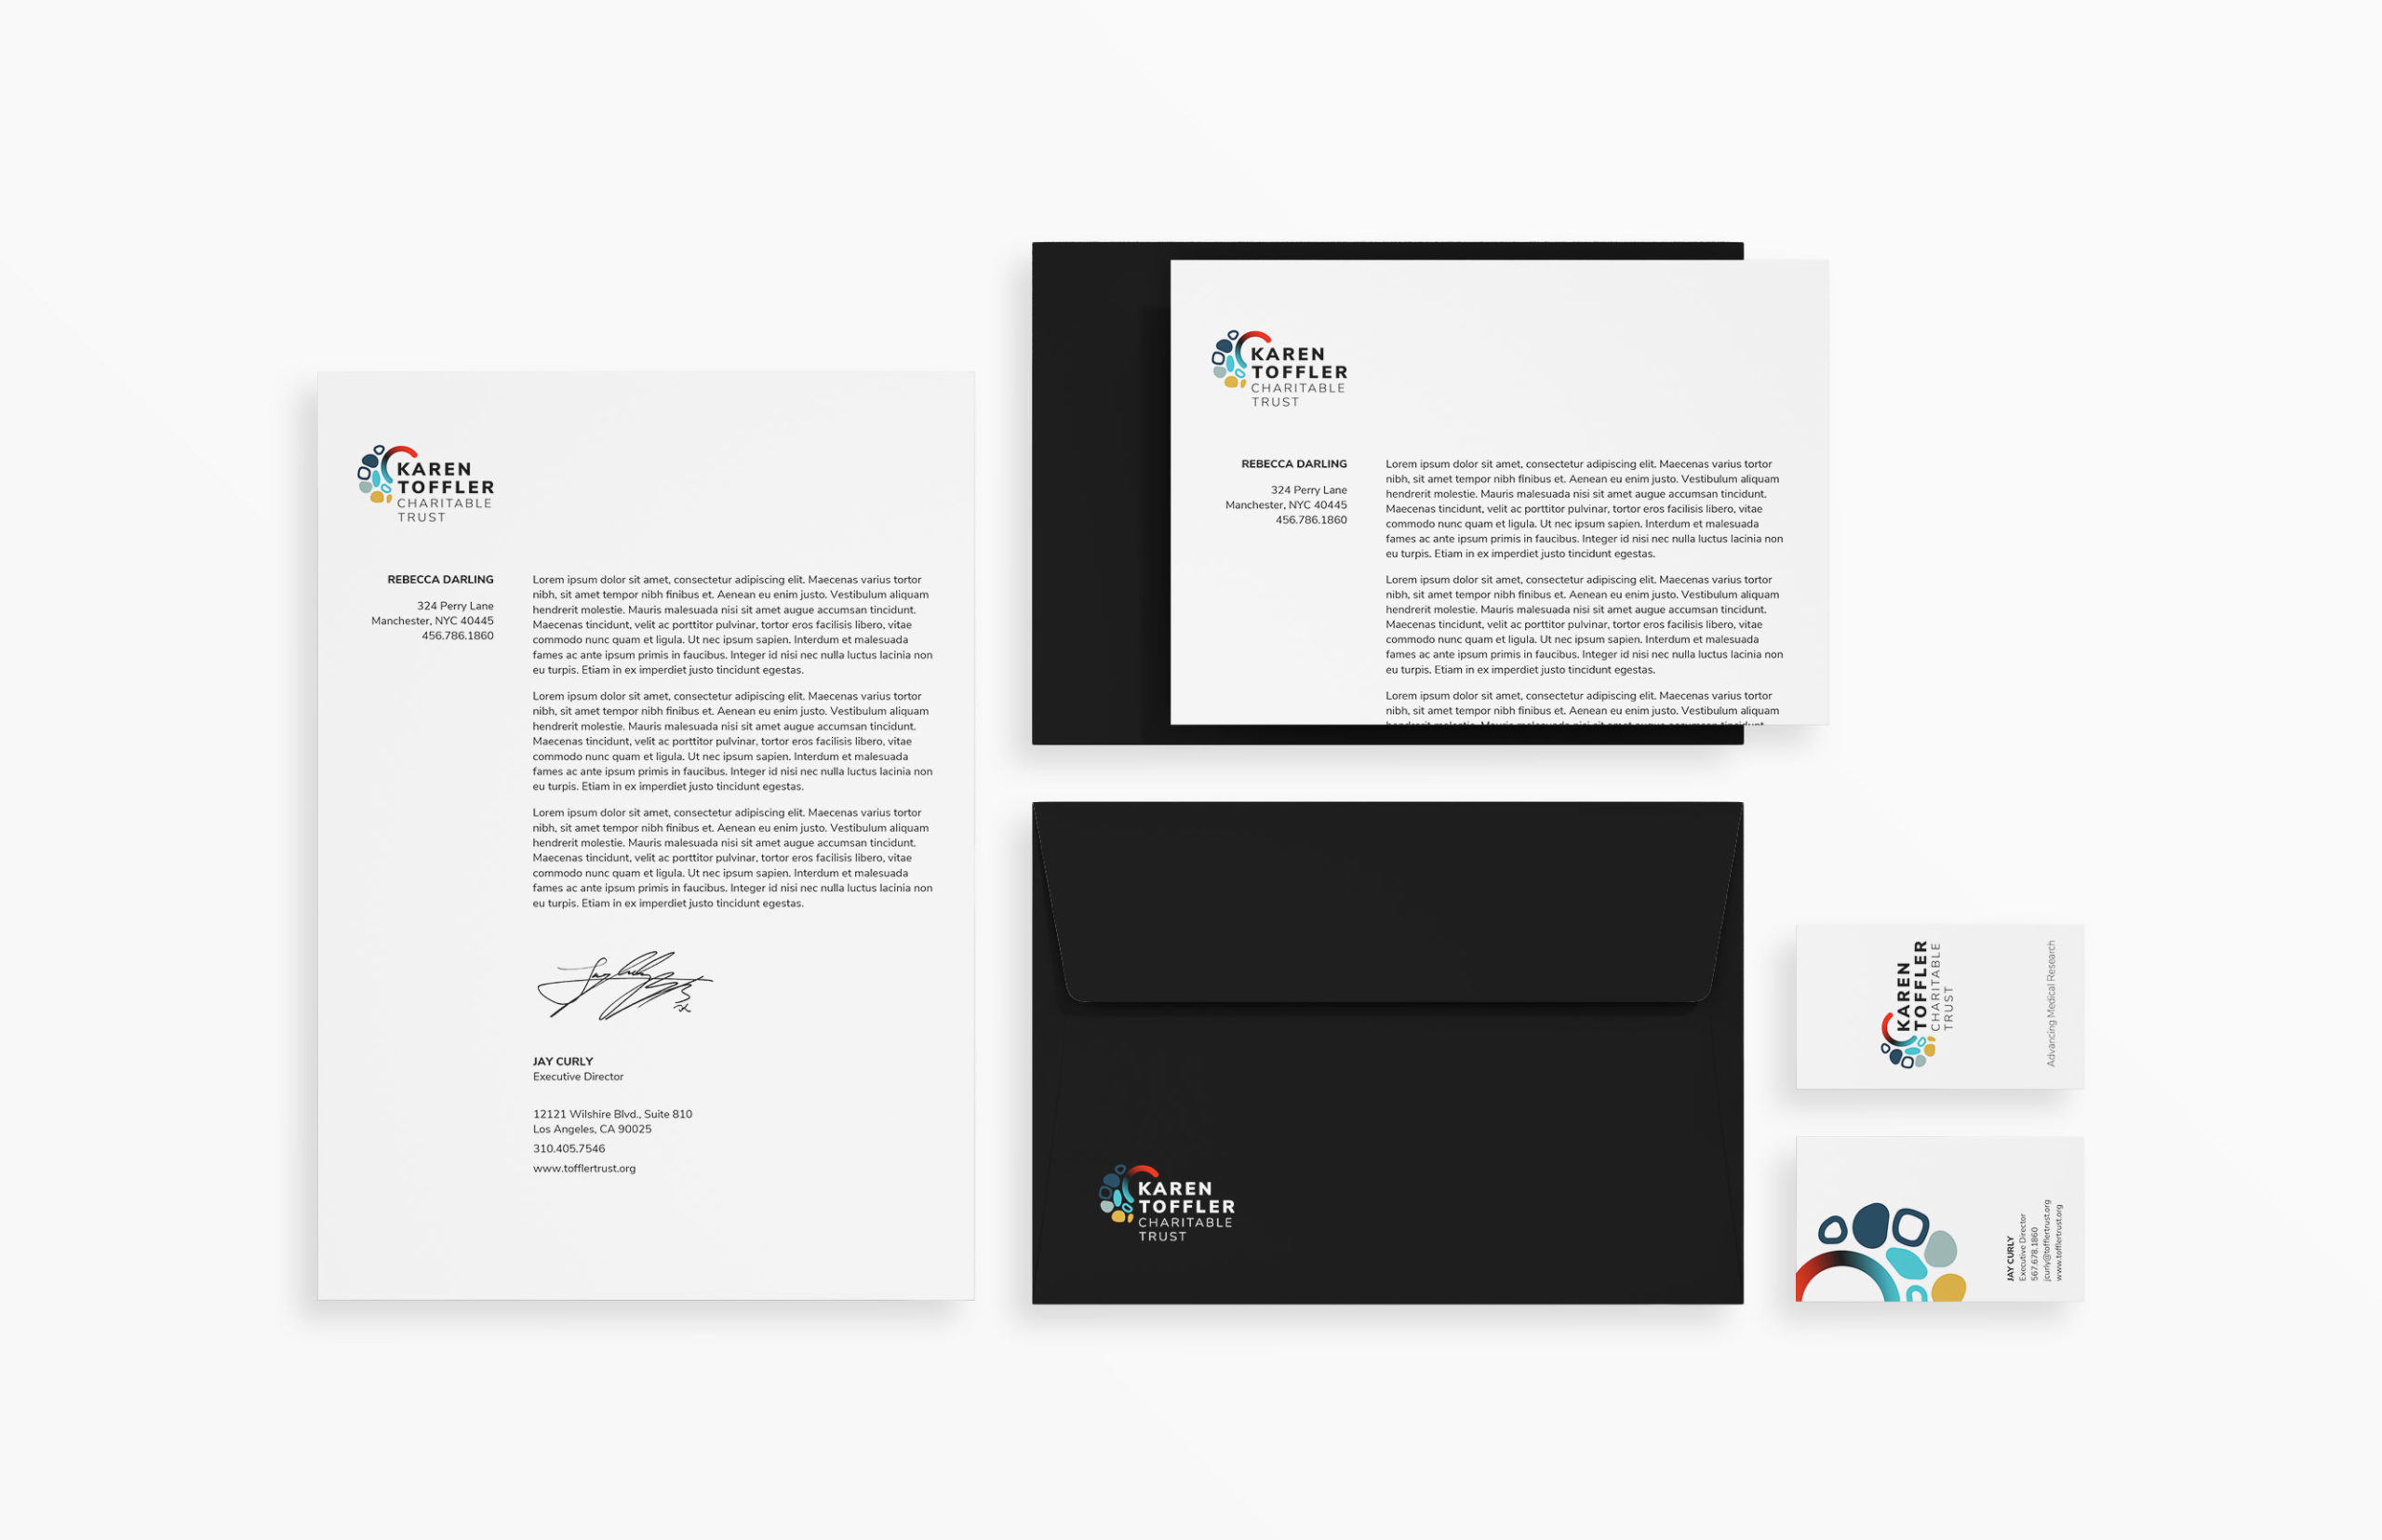 Branded stationary including business cards, letterhead and envelopes.